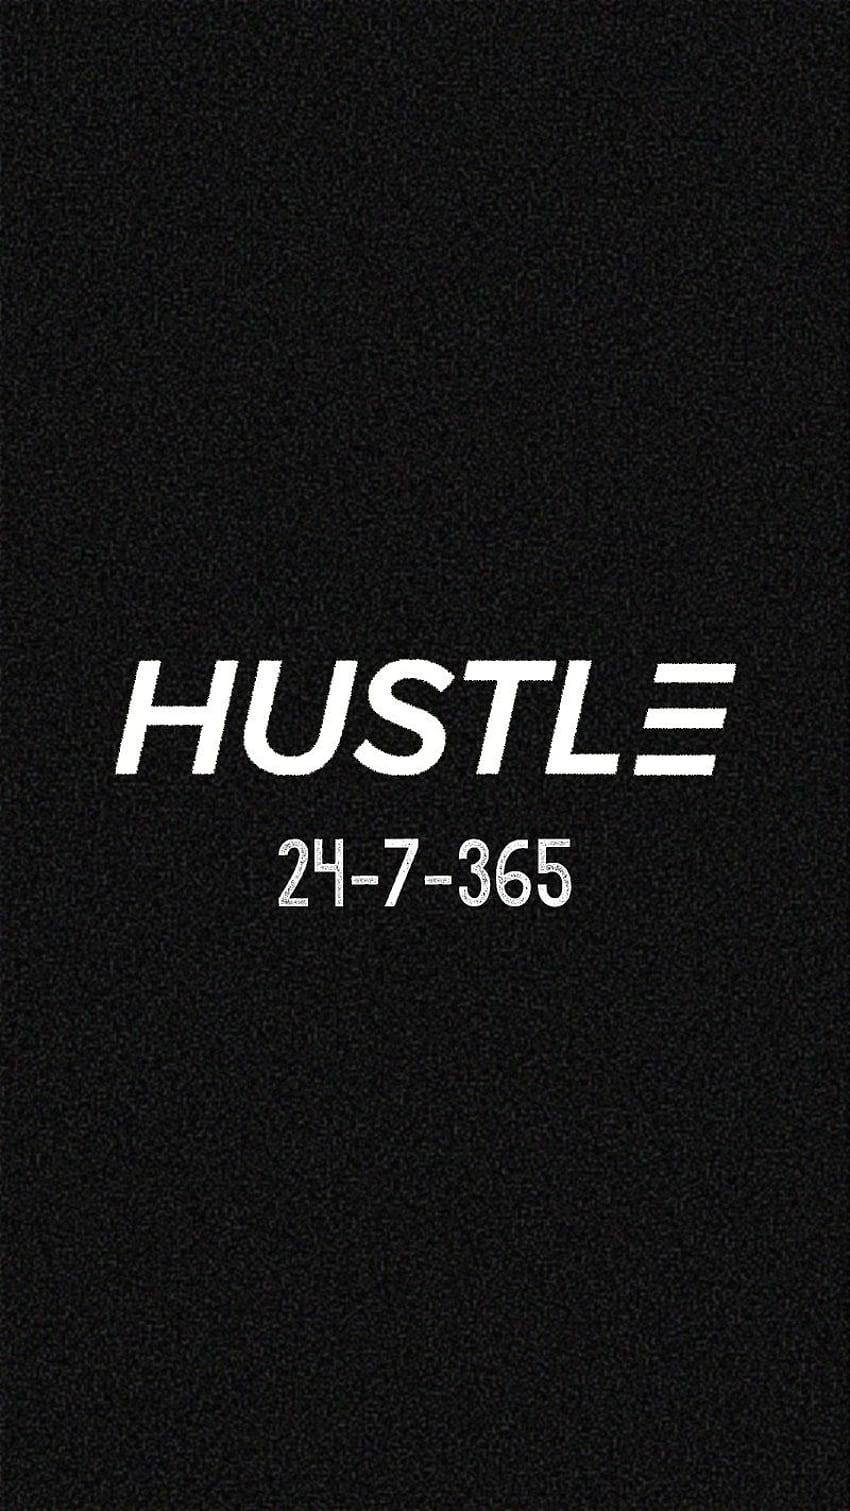 Hustle posted by Sarah Sellers, hustle loyalty respect HD phone wallpaper